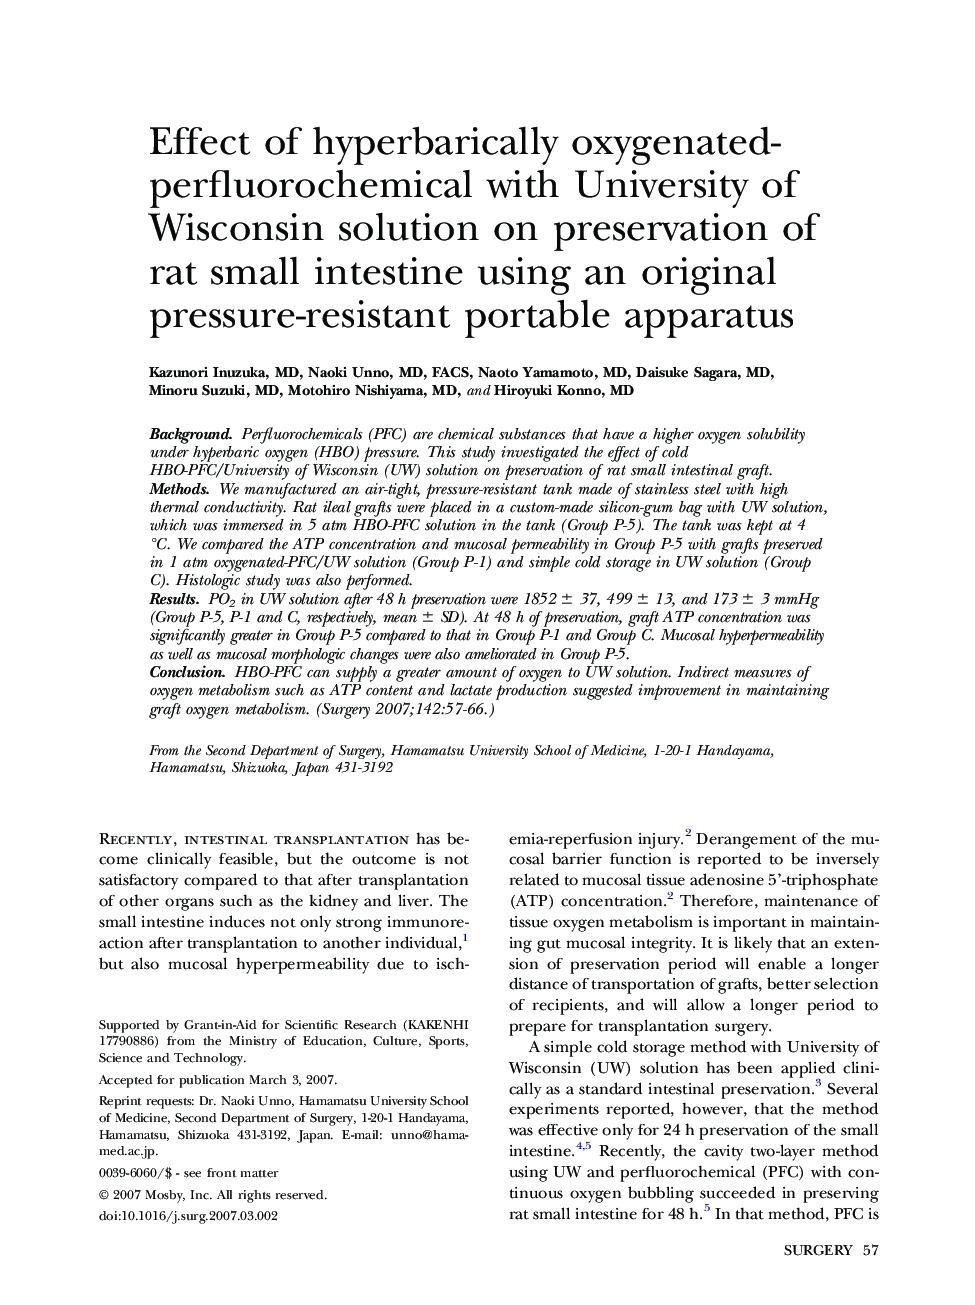 Effect of hyperbarically oxygenated-perfluorochemical with University of Wisconsin solution on preservation of rat small intestine using an original pressure-resistant portable apparatus 